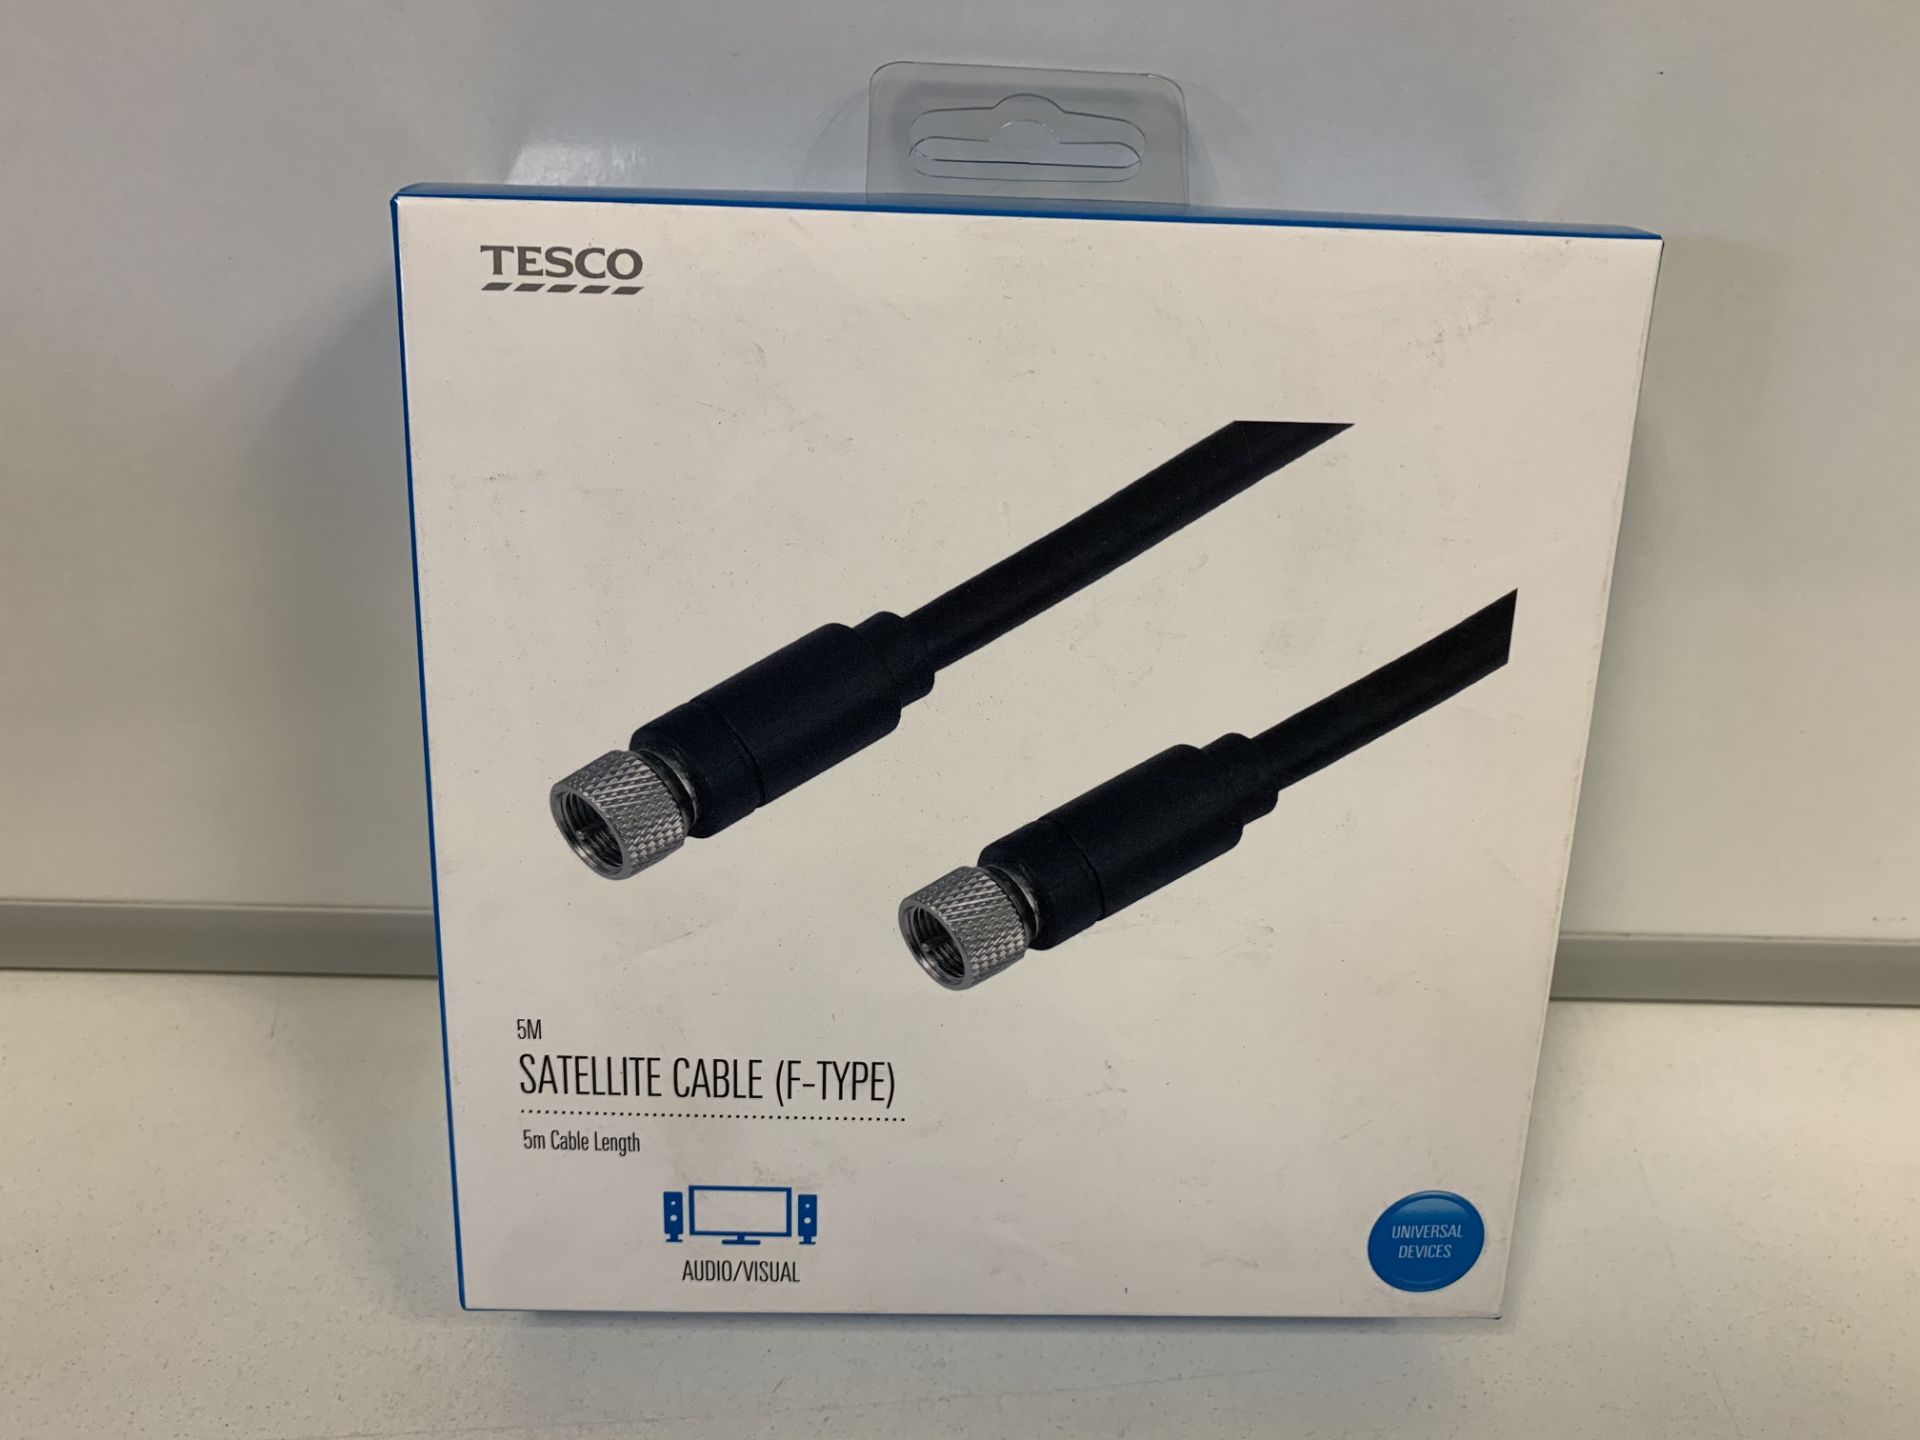 36 X BRAND NEW TESCO 5M STAELLITE CABLE (F-TYPE) (212/23)